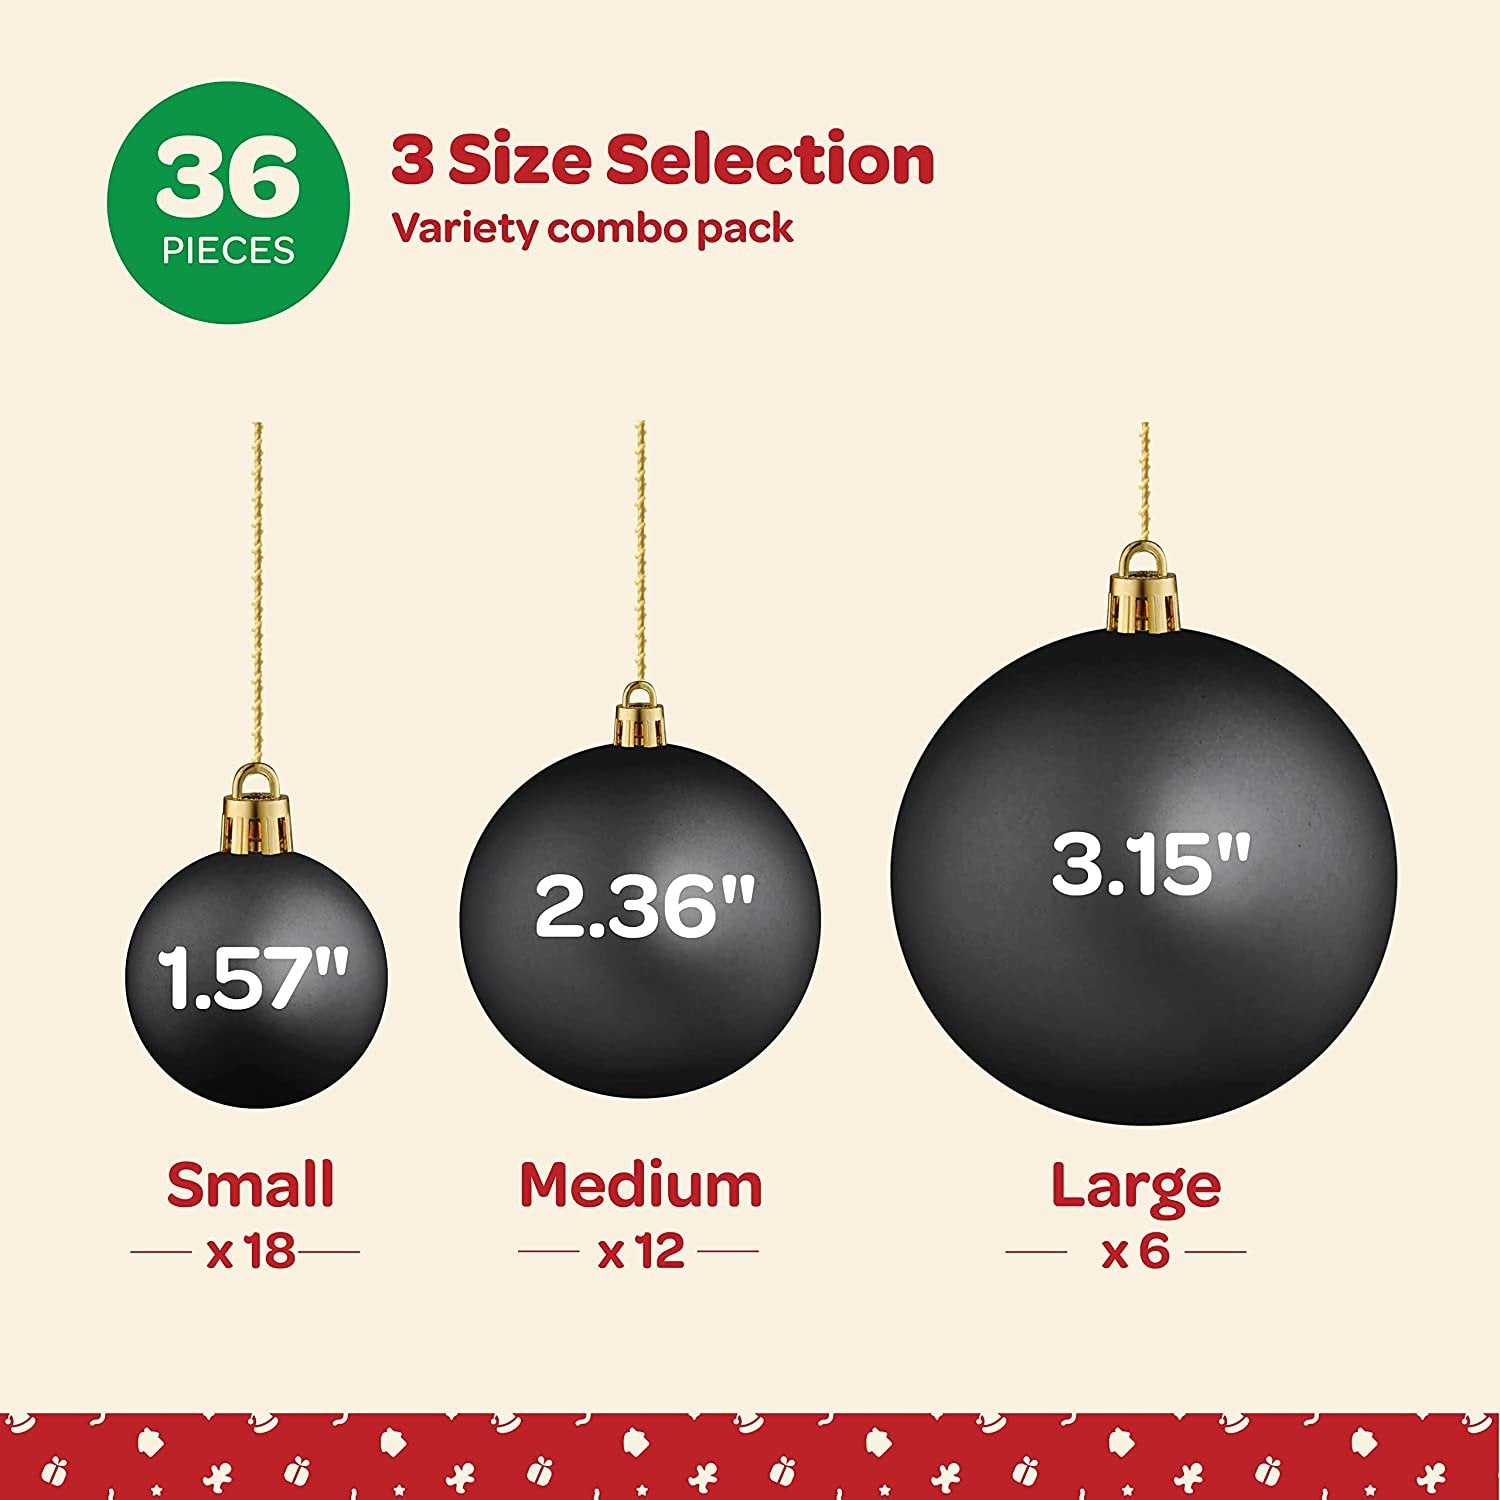 Christmas Ornaments Set of 36 - Beautiful [Black] Christmas Tree Decorations Ornaments Set - 6 Style Christmas Ball Ornaments - Shatterproof/Pre-Strung - for Holiday/Party/Decorations/DIY